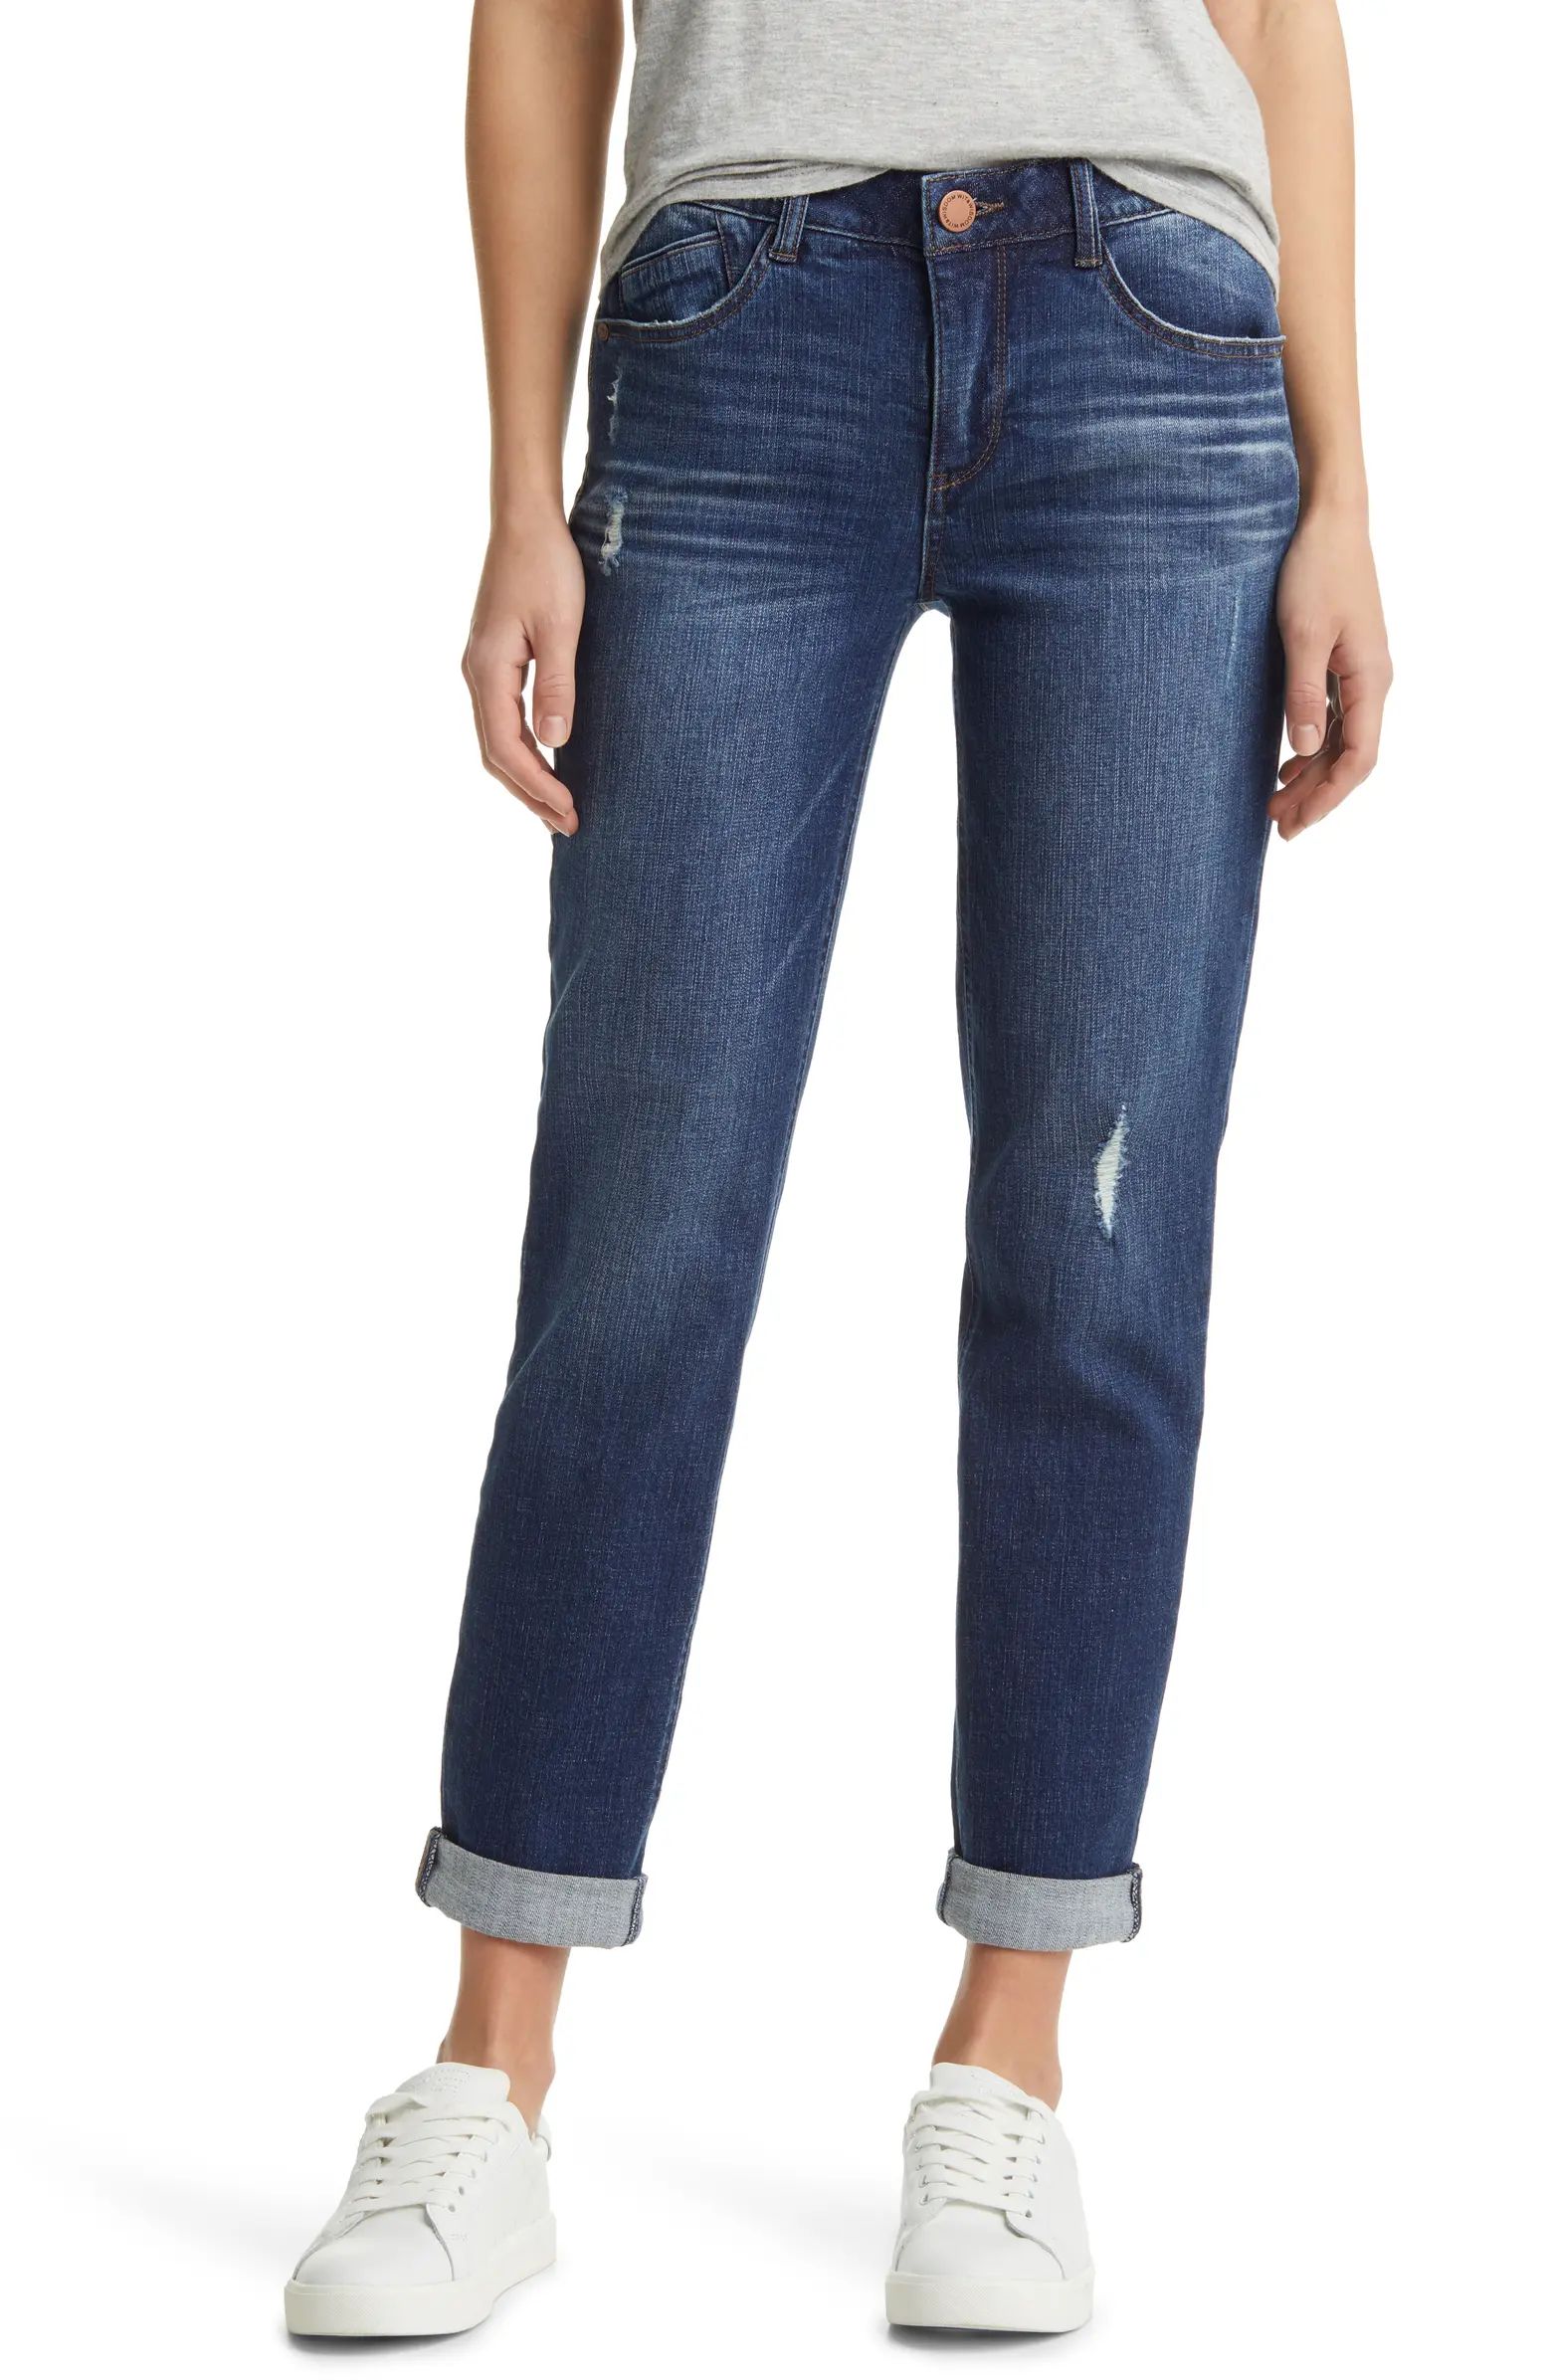 Wit & Wisdom 'Ab'Solution Distressed Girlfriend Jeans | Nordstrom | Nordstrom